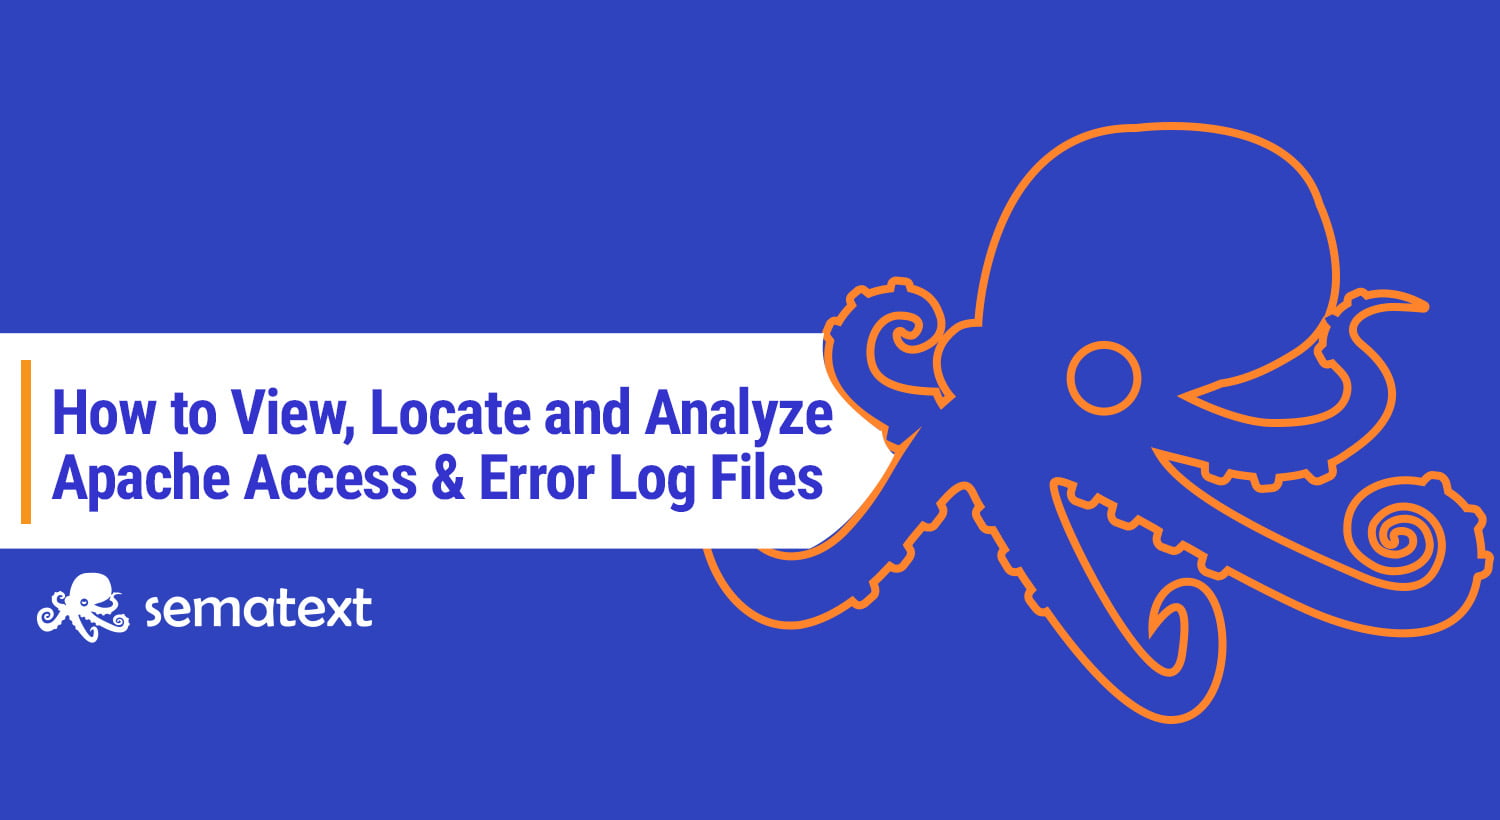 How to View & Analyze Apache Access & Error Log Files - Sematext